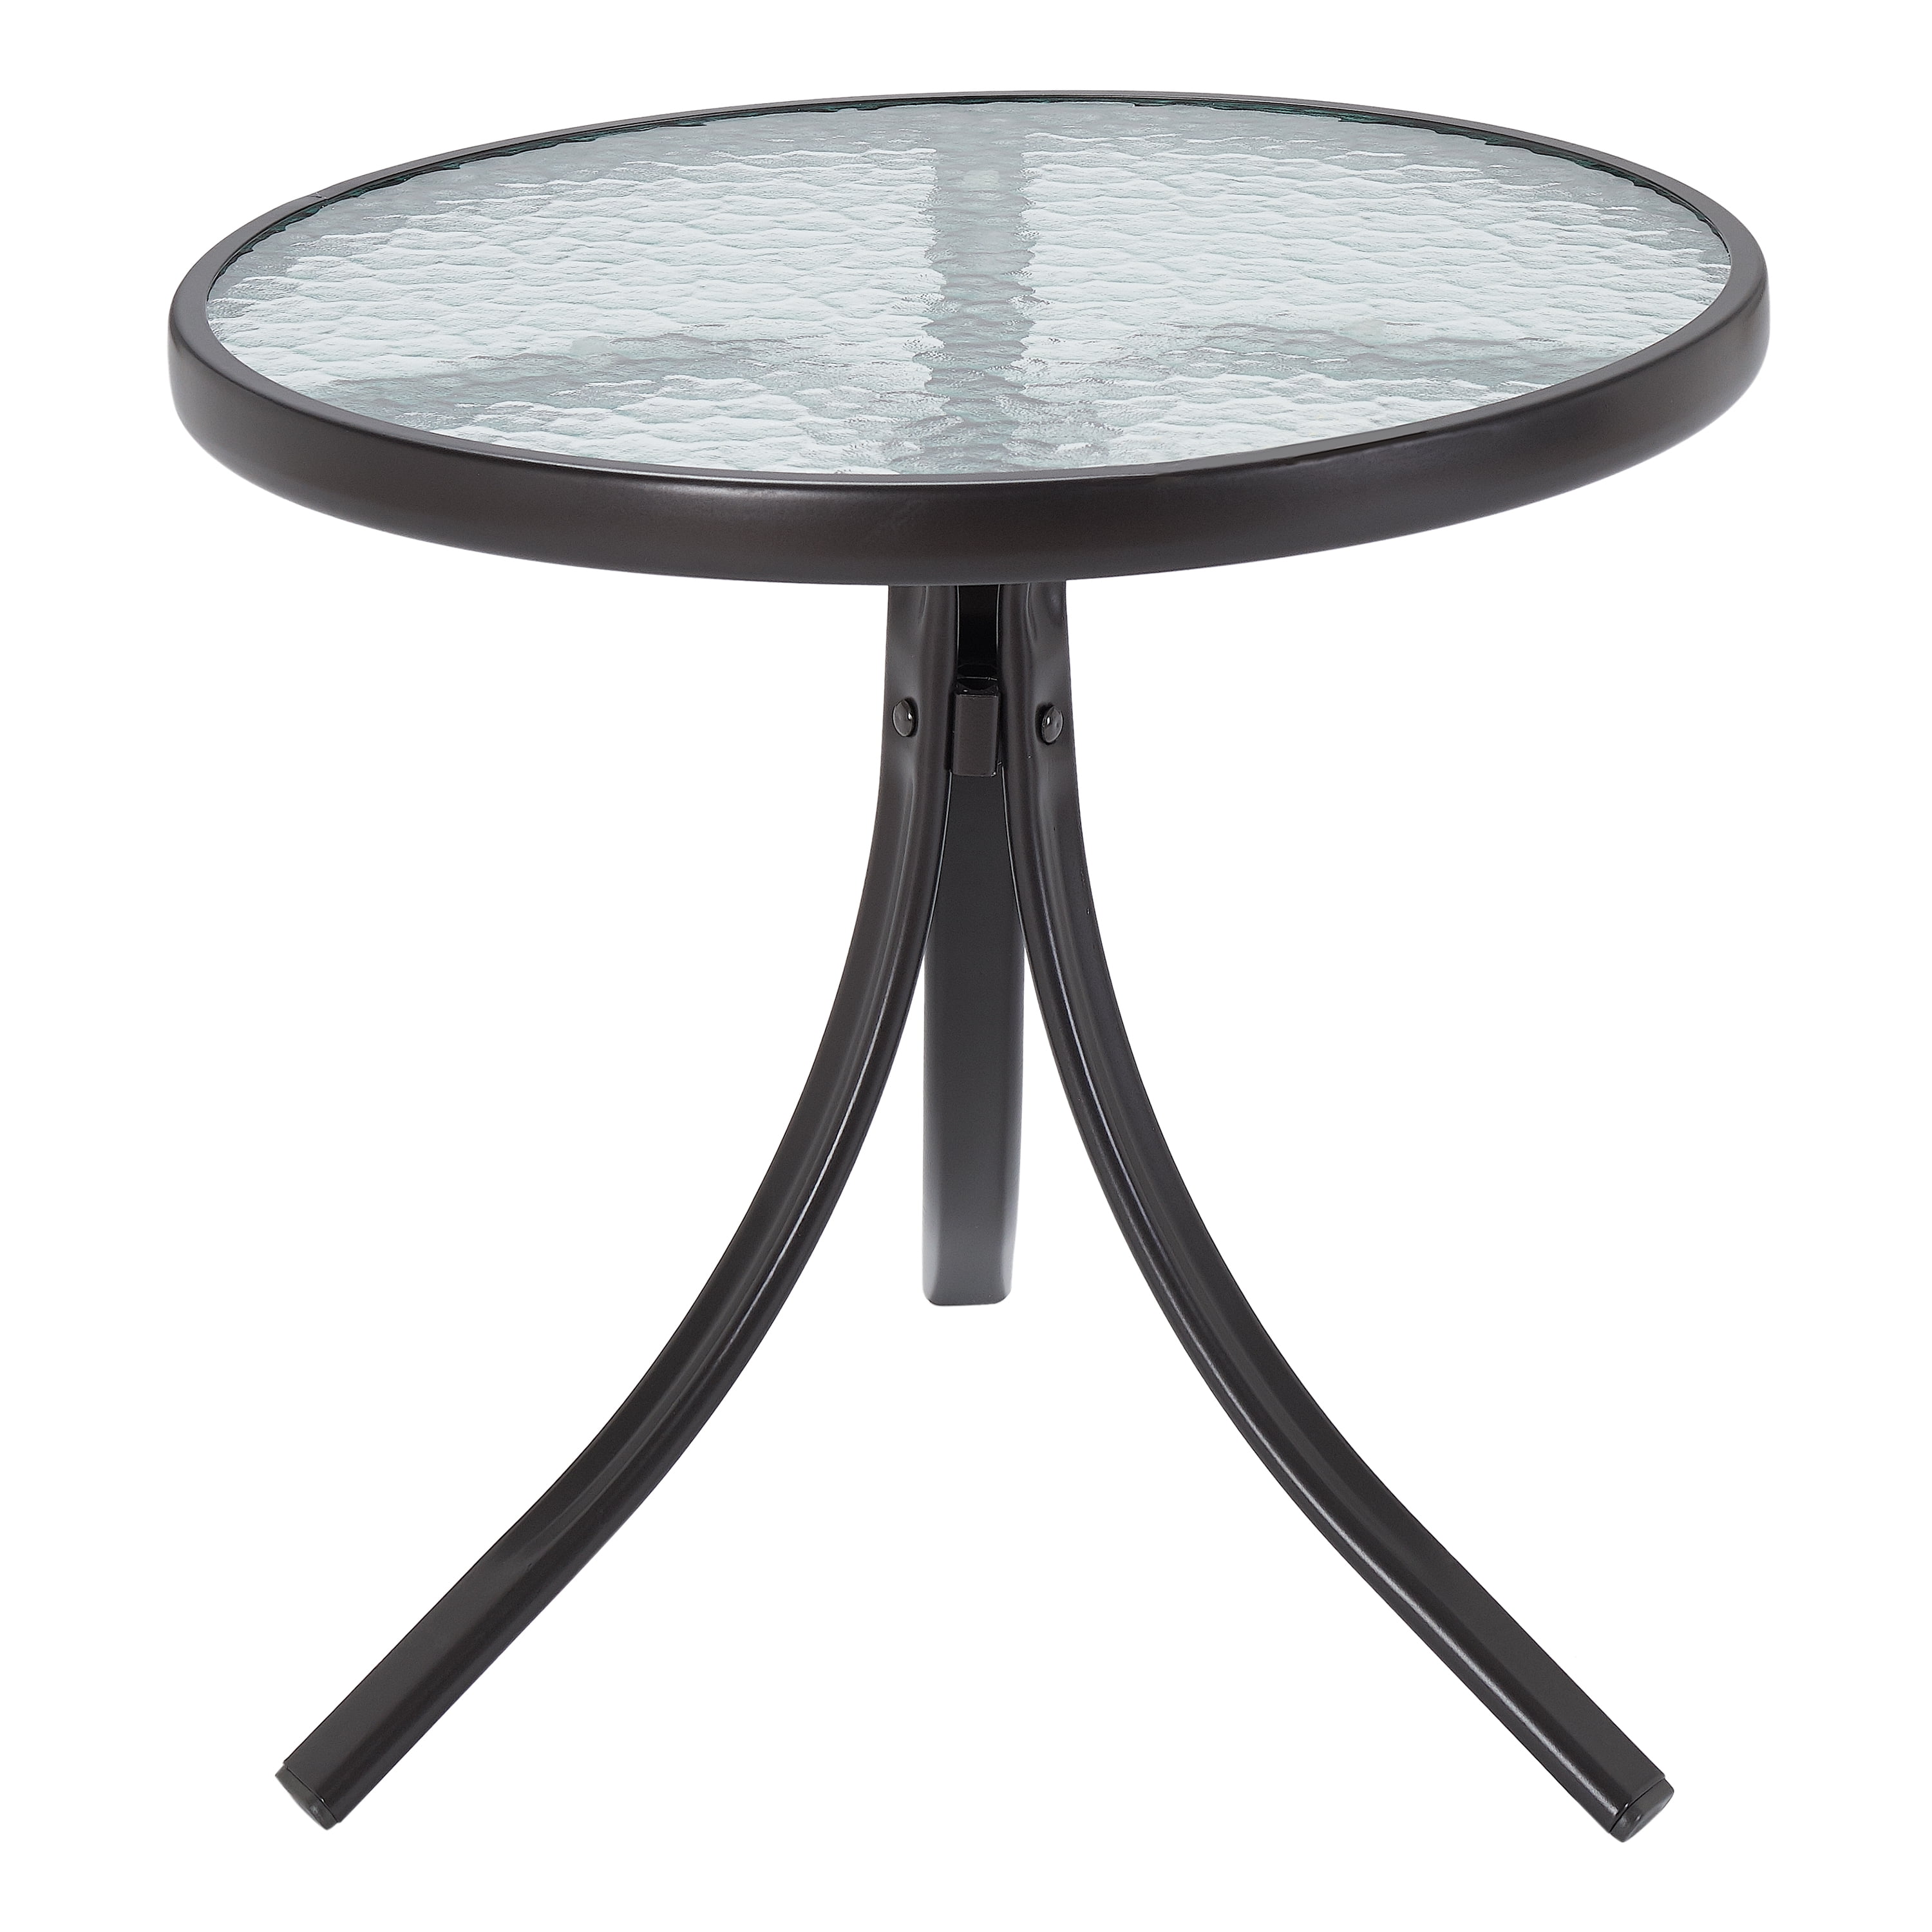 Mainstays Round Glass Patio Table